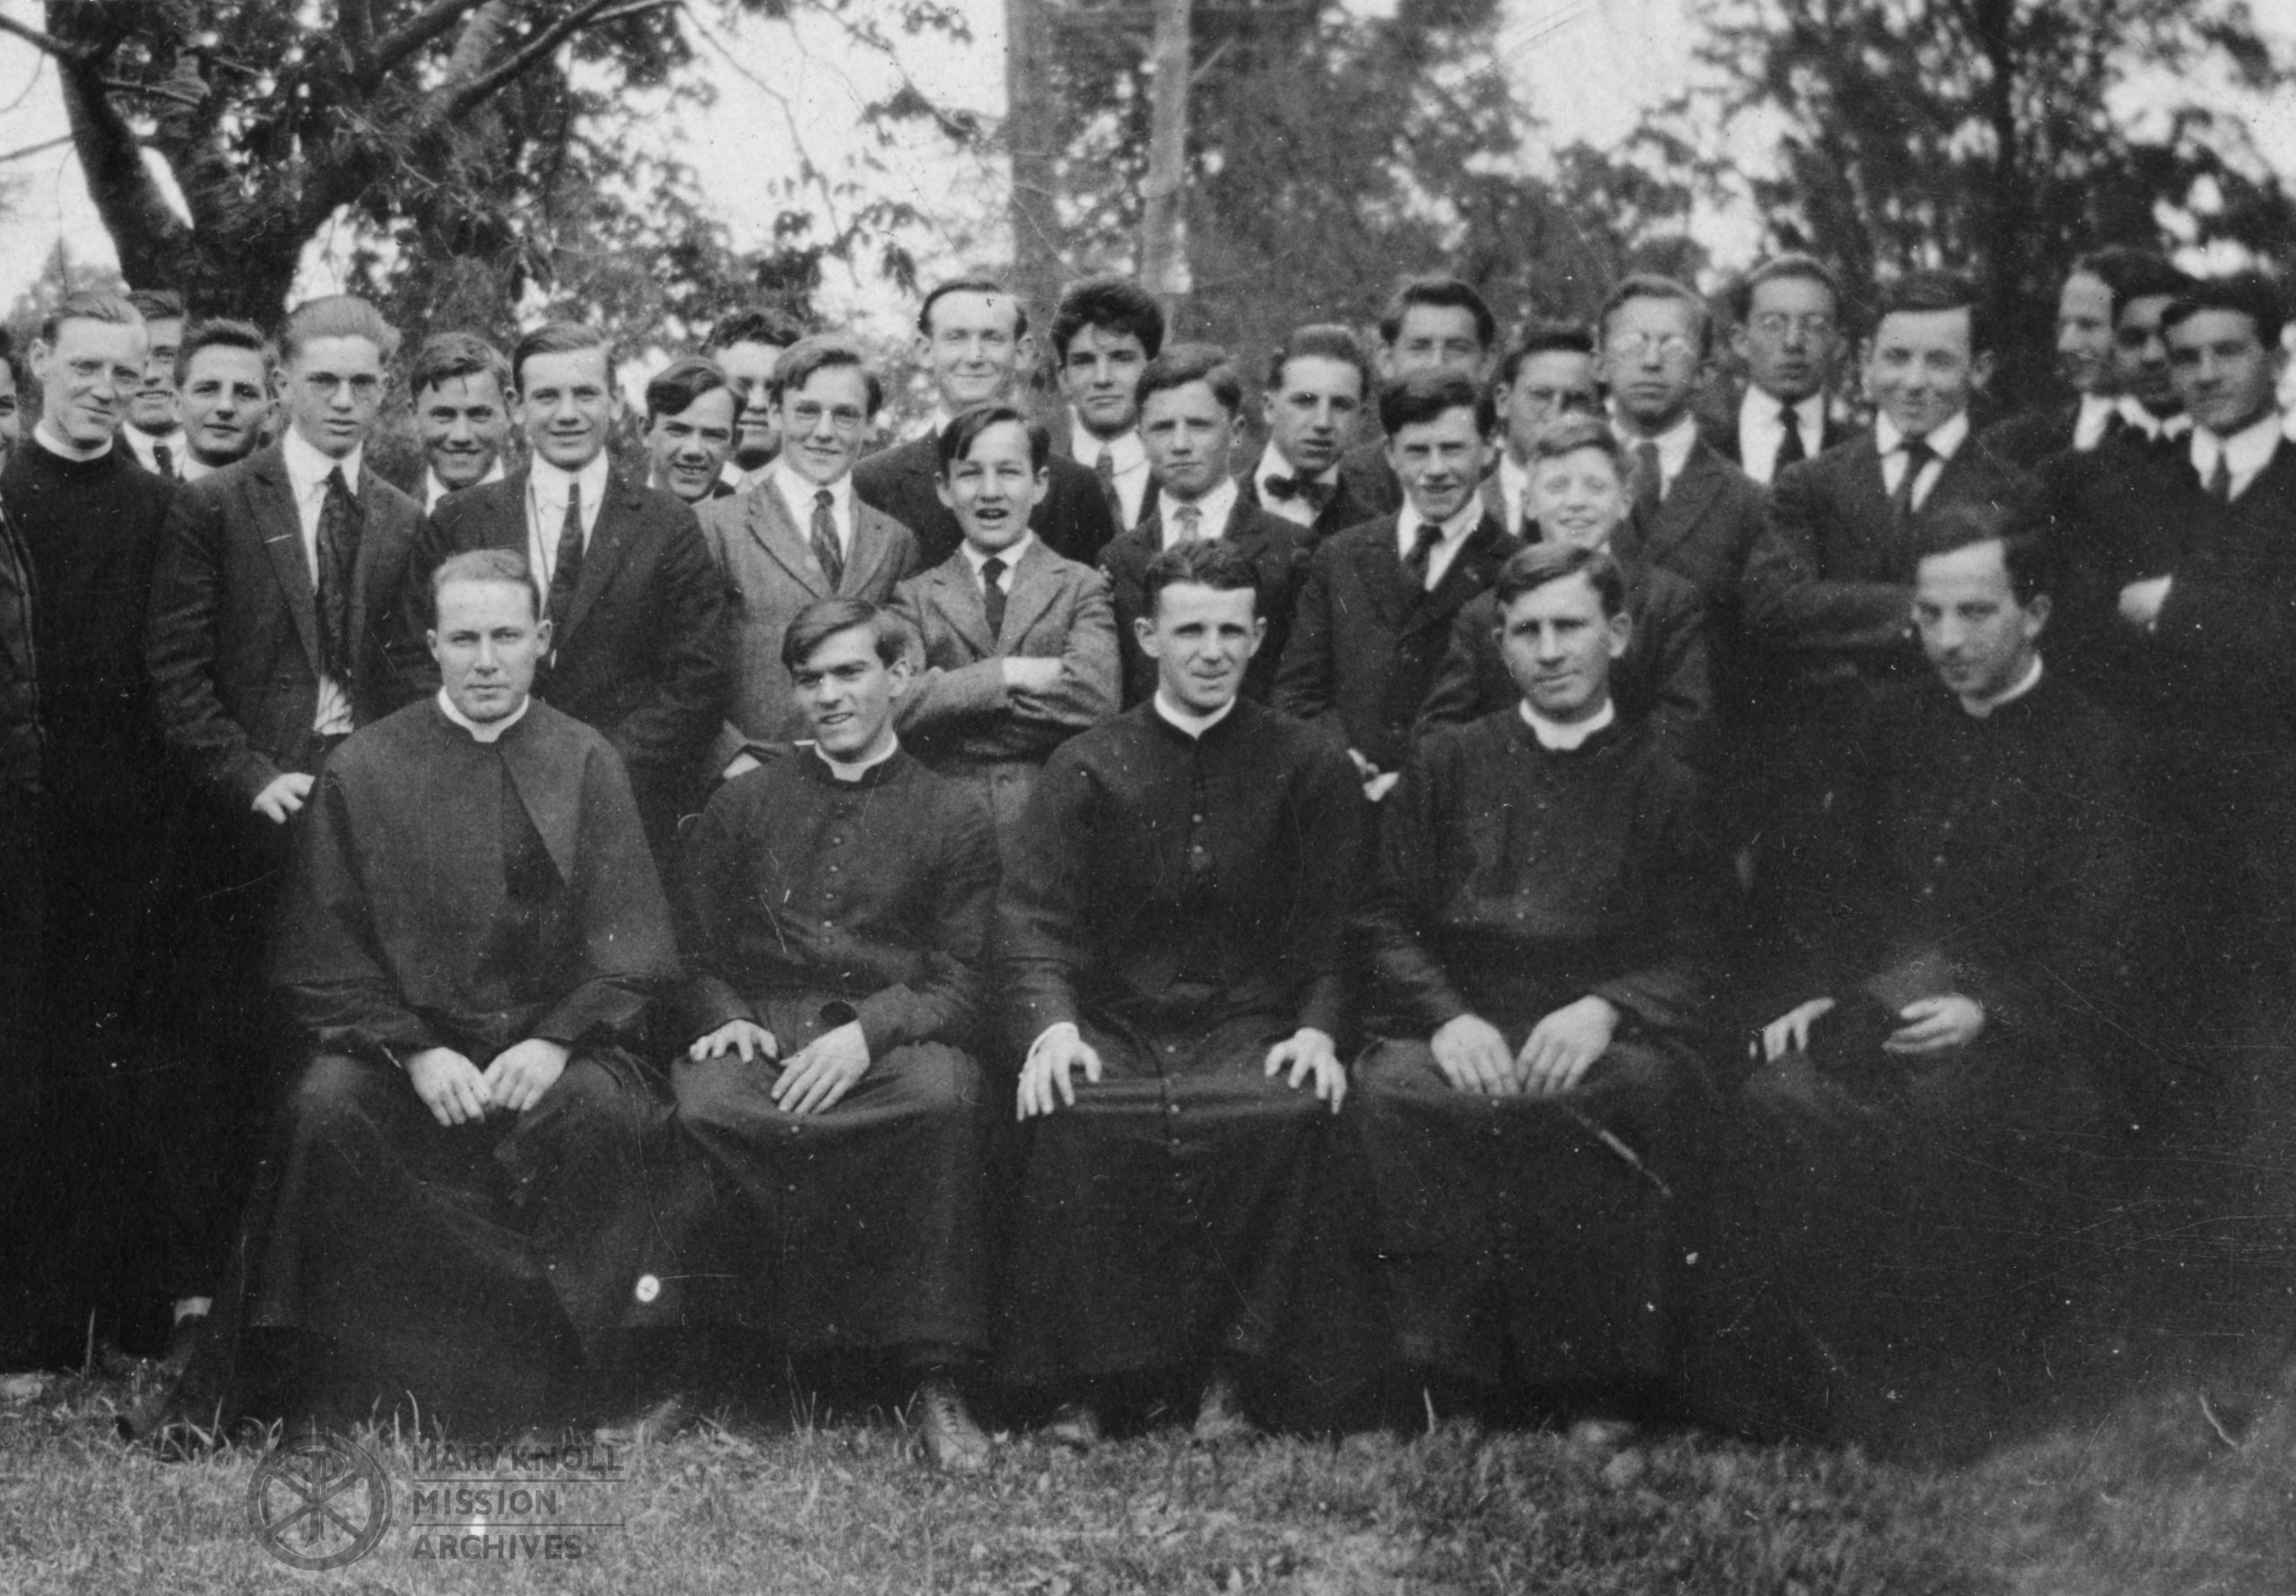 Frs. James E. Walsh, Francis X. Ford and Bernard Meyer at Venard College in 1918